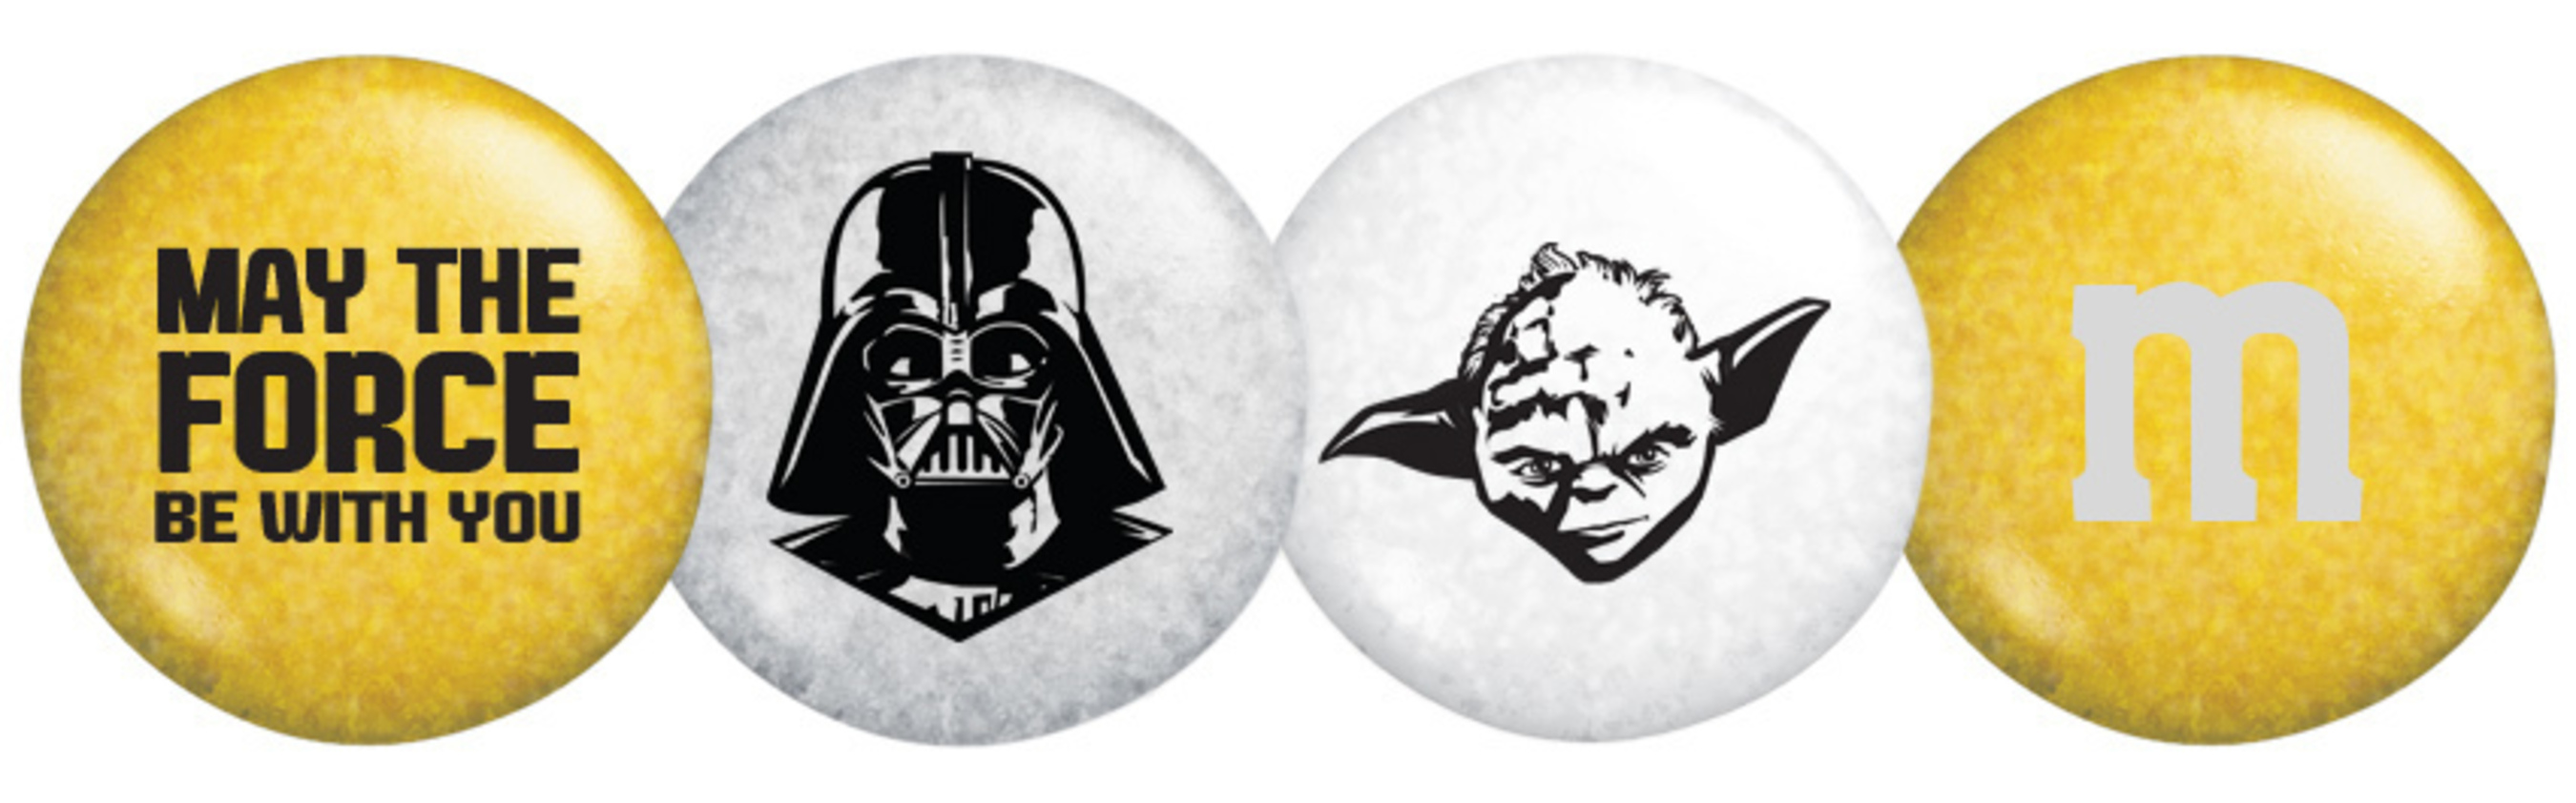 M&M's characters go to the 'dark side